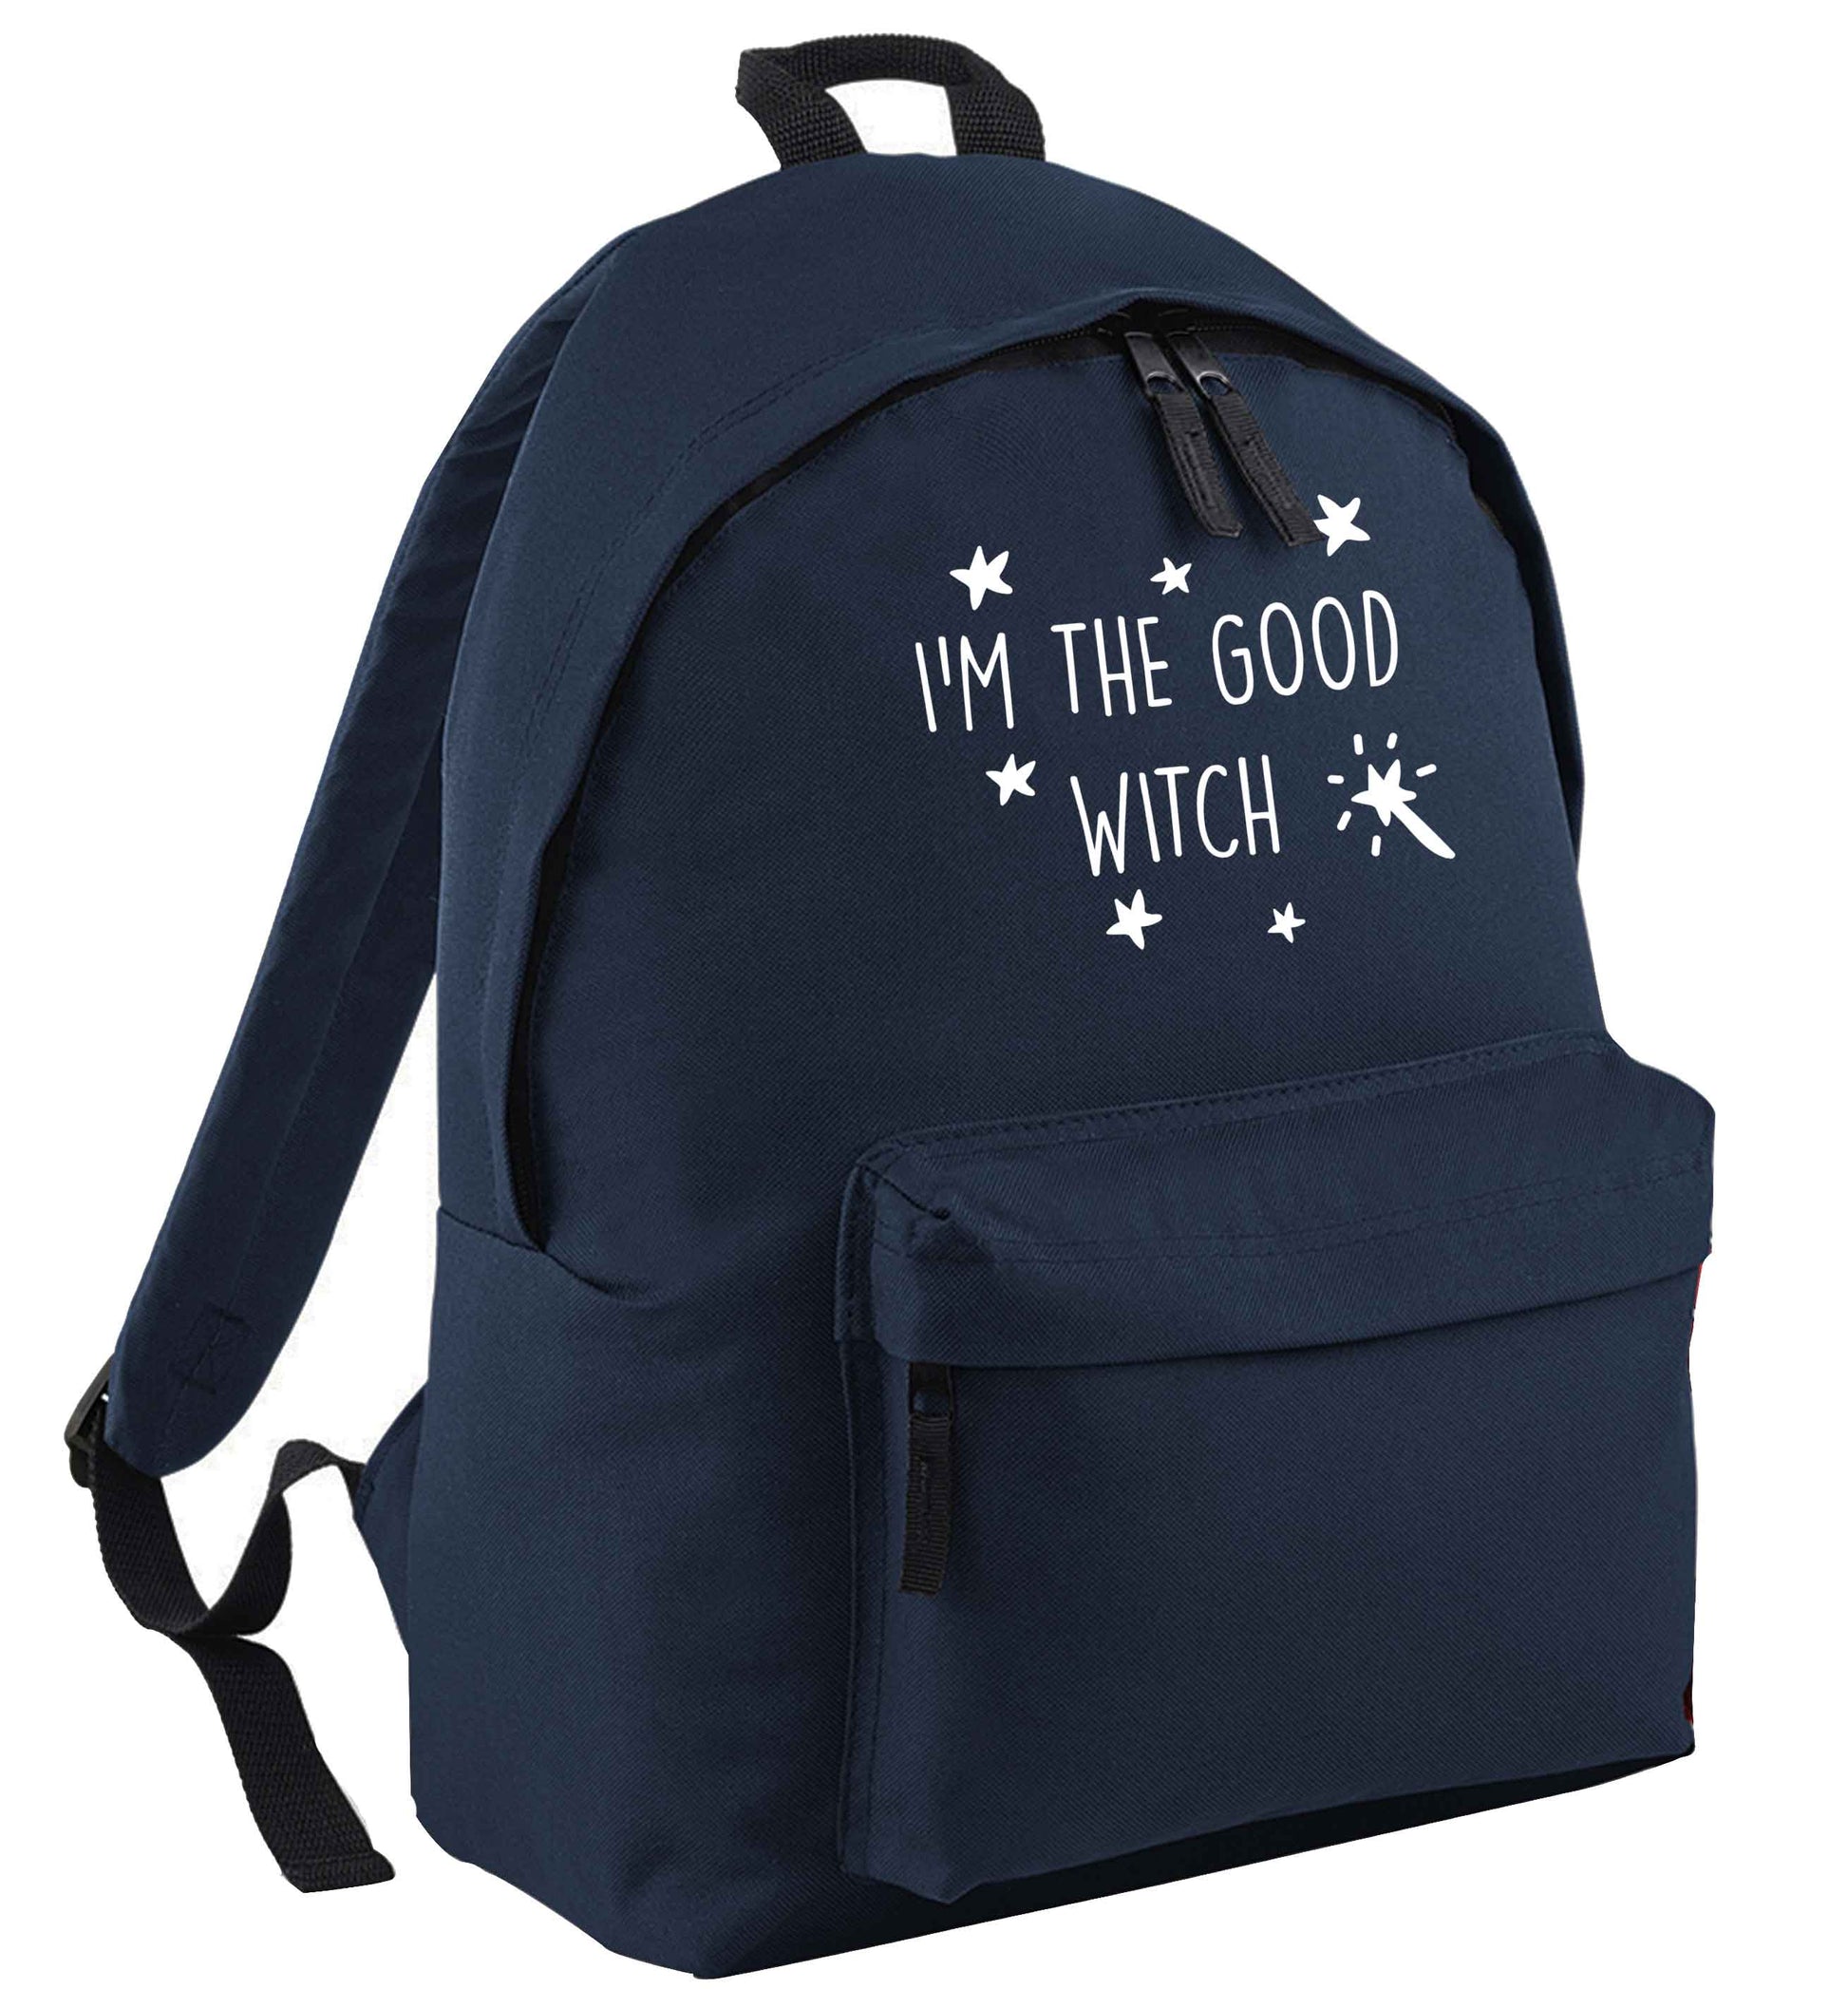 Good witch | Children's backpack